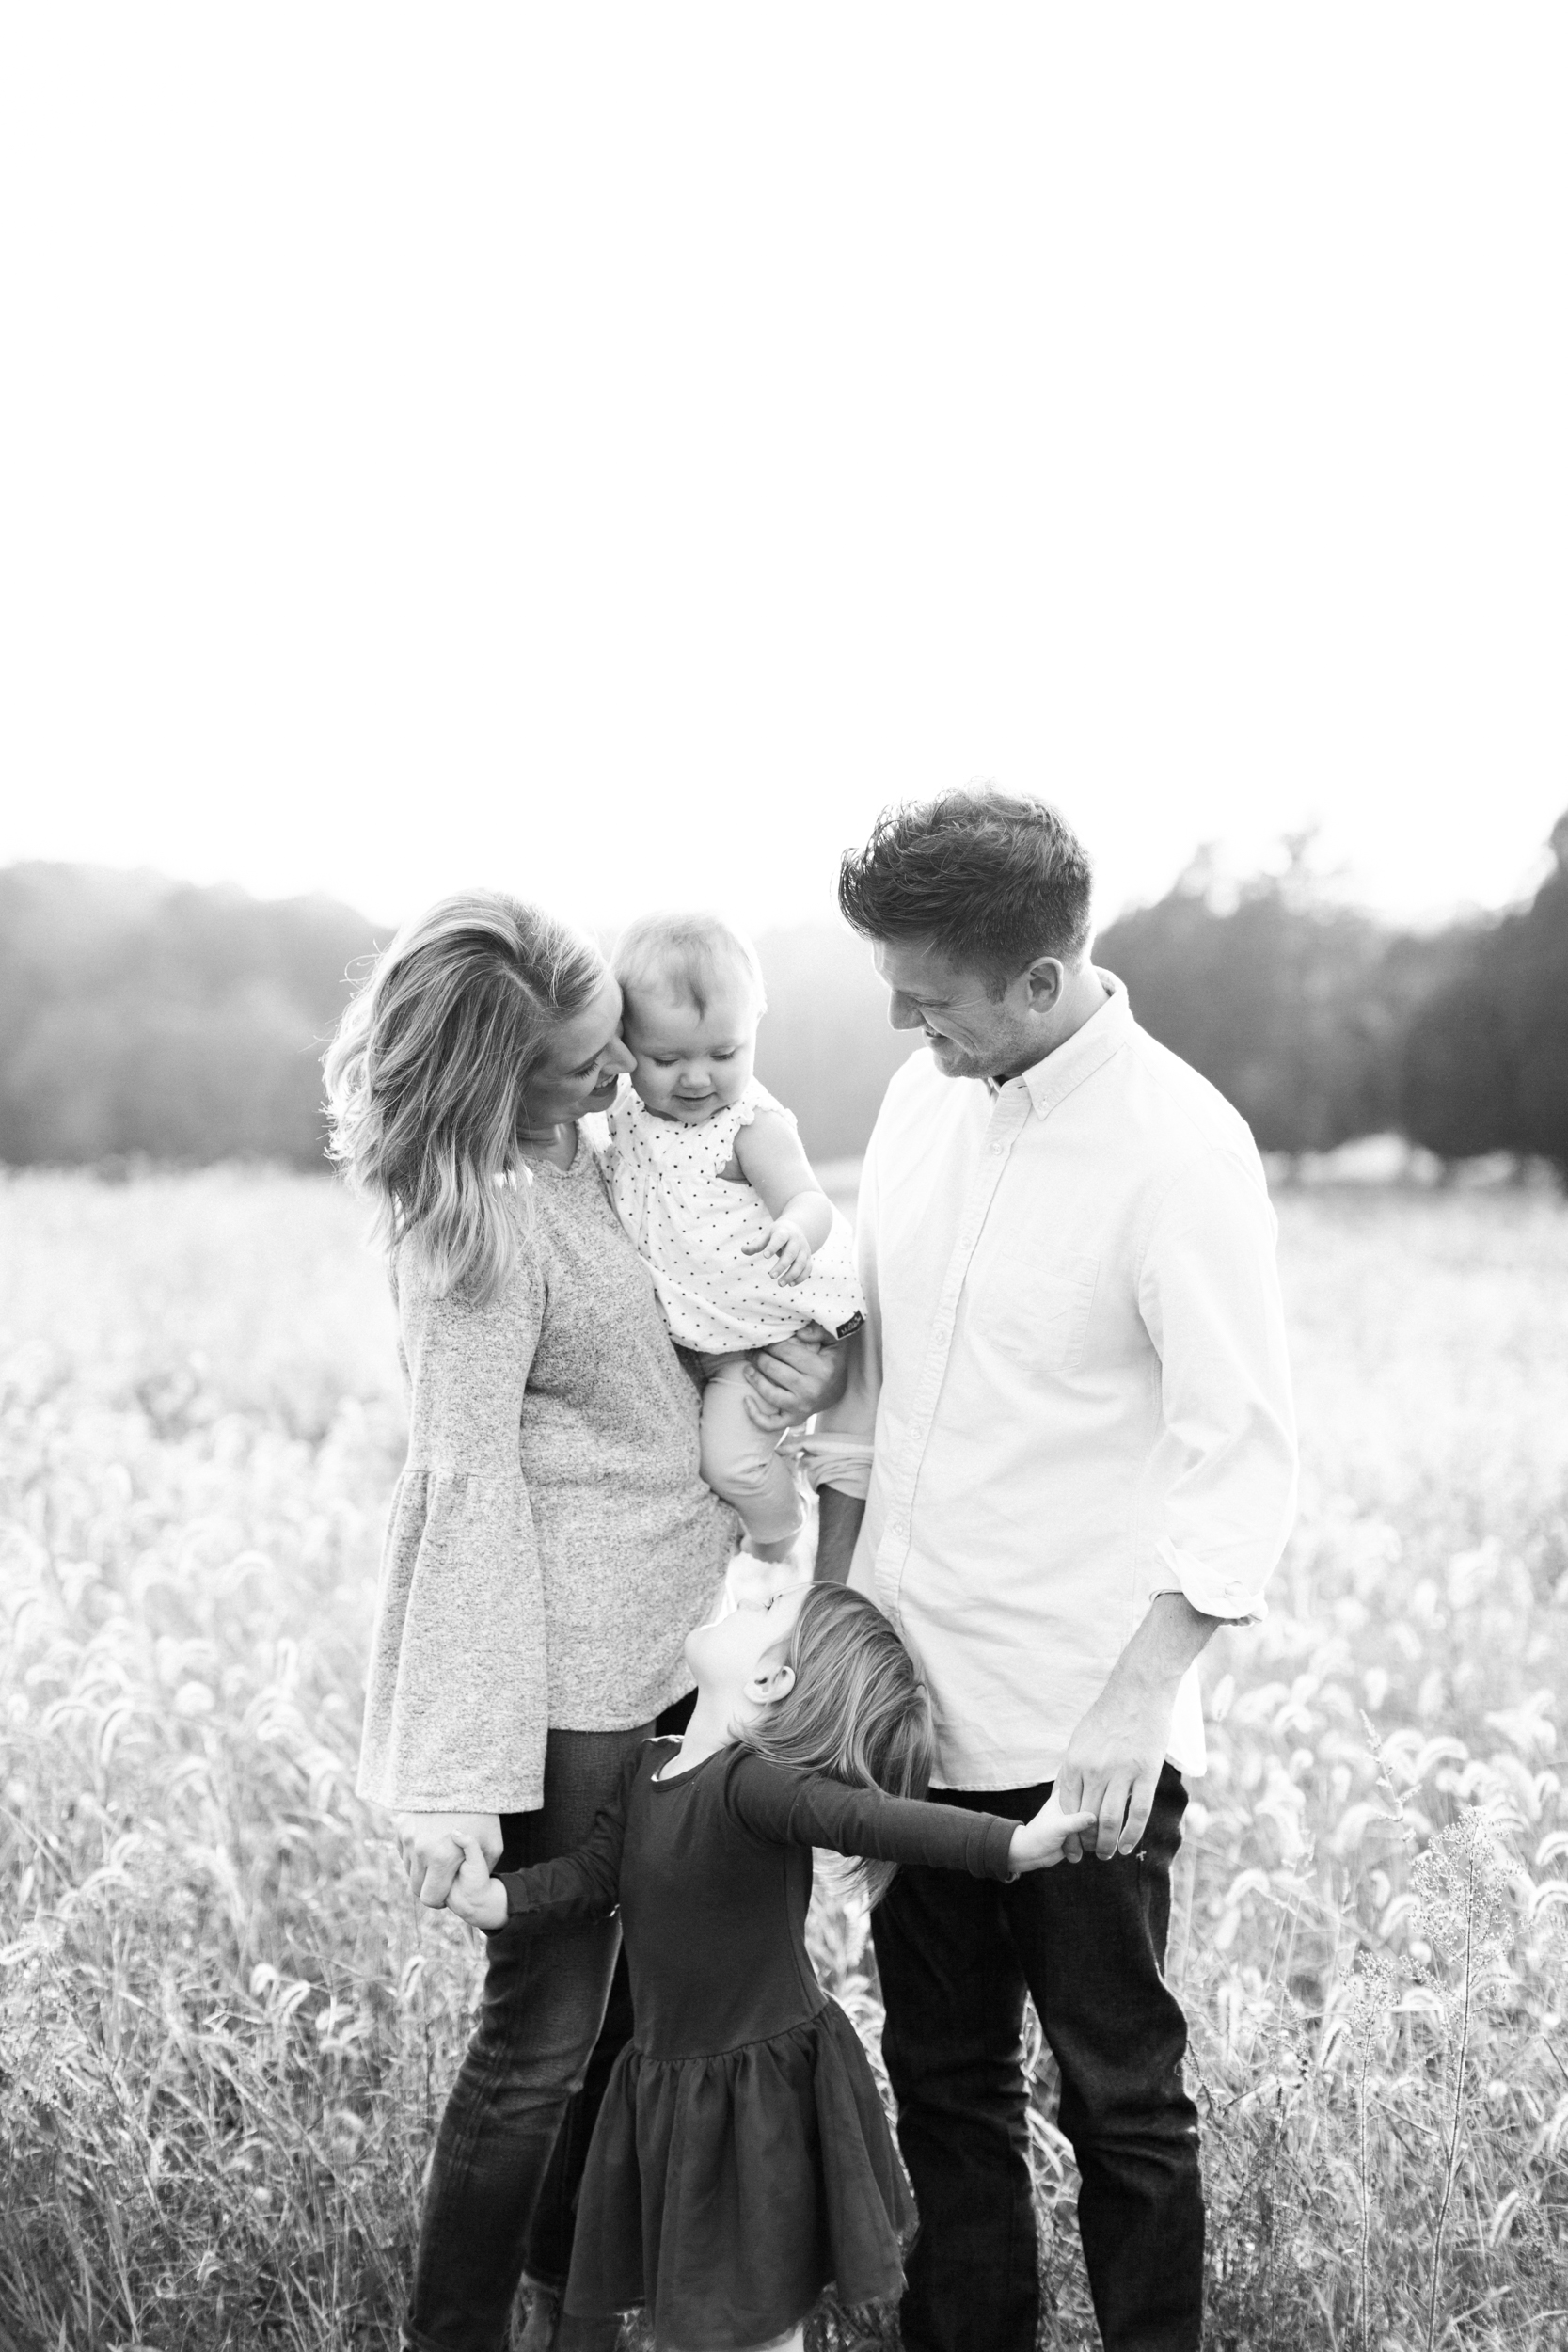 Fall family photo in a field. Photographed by morgan williams photography.